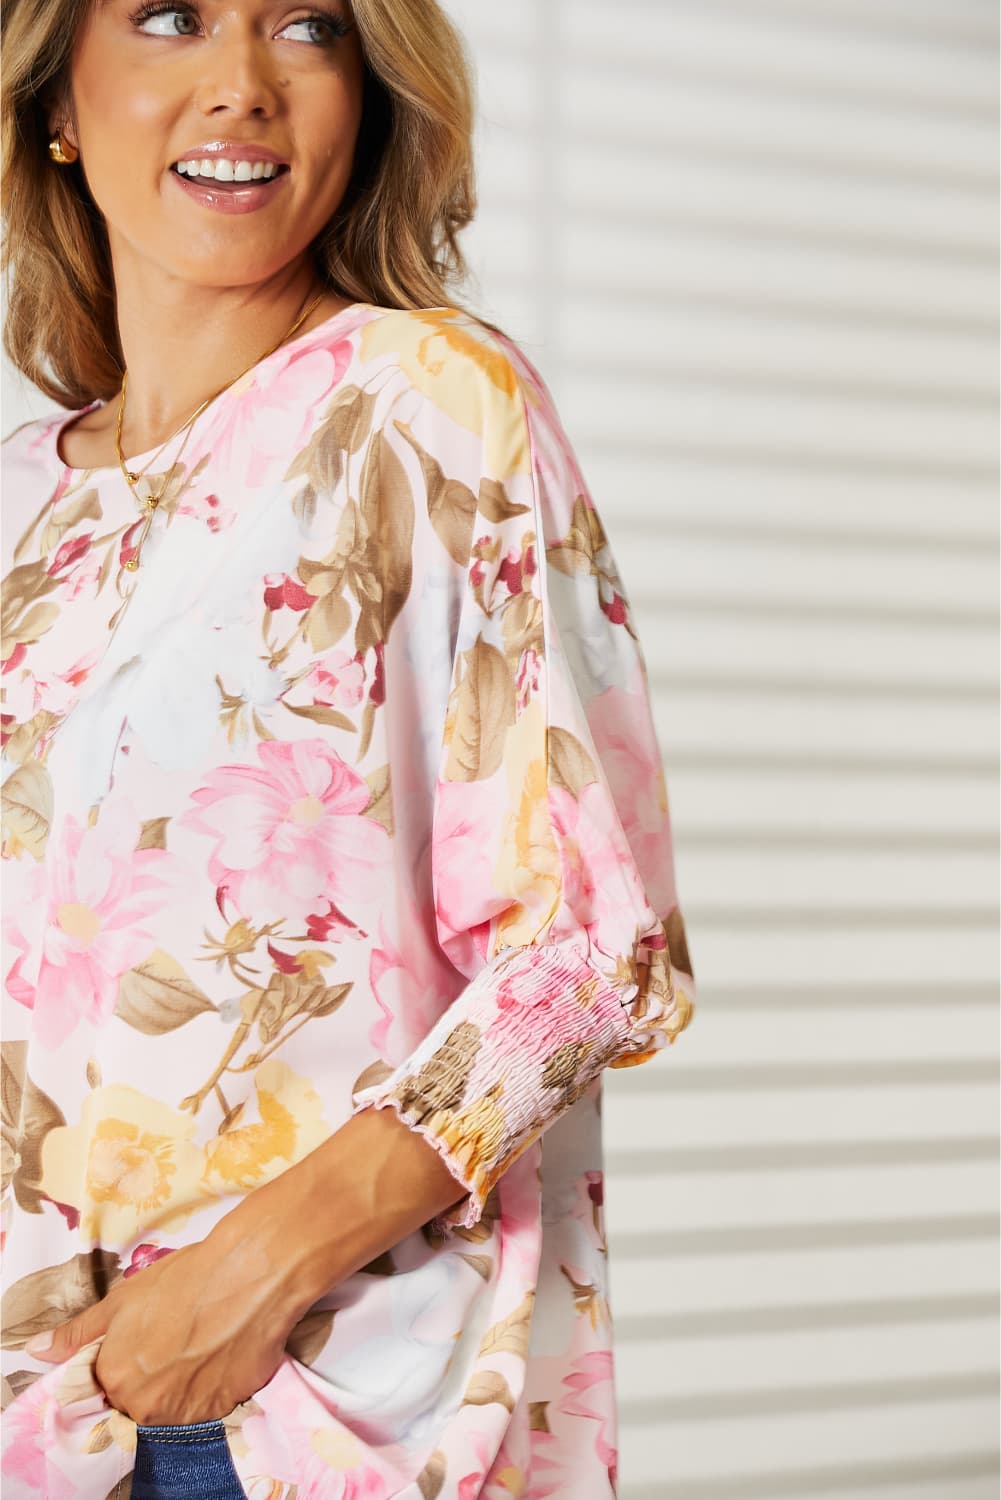 Double Take Floral Round Neck Three-Quarter Sleeve Top - nailedmoms